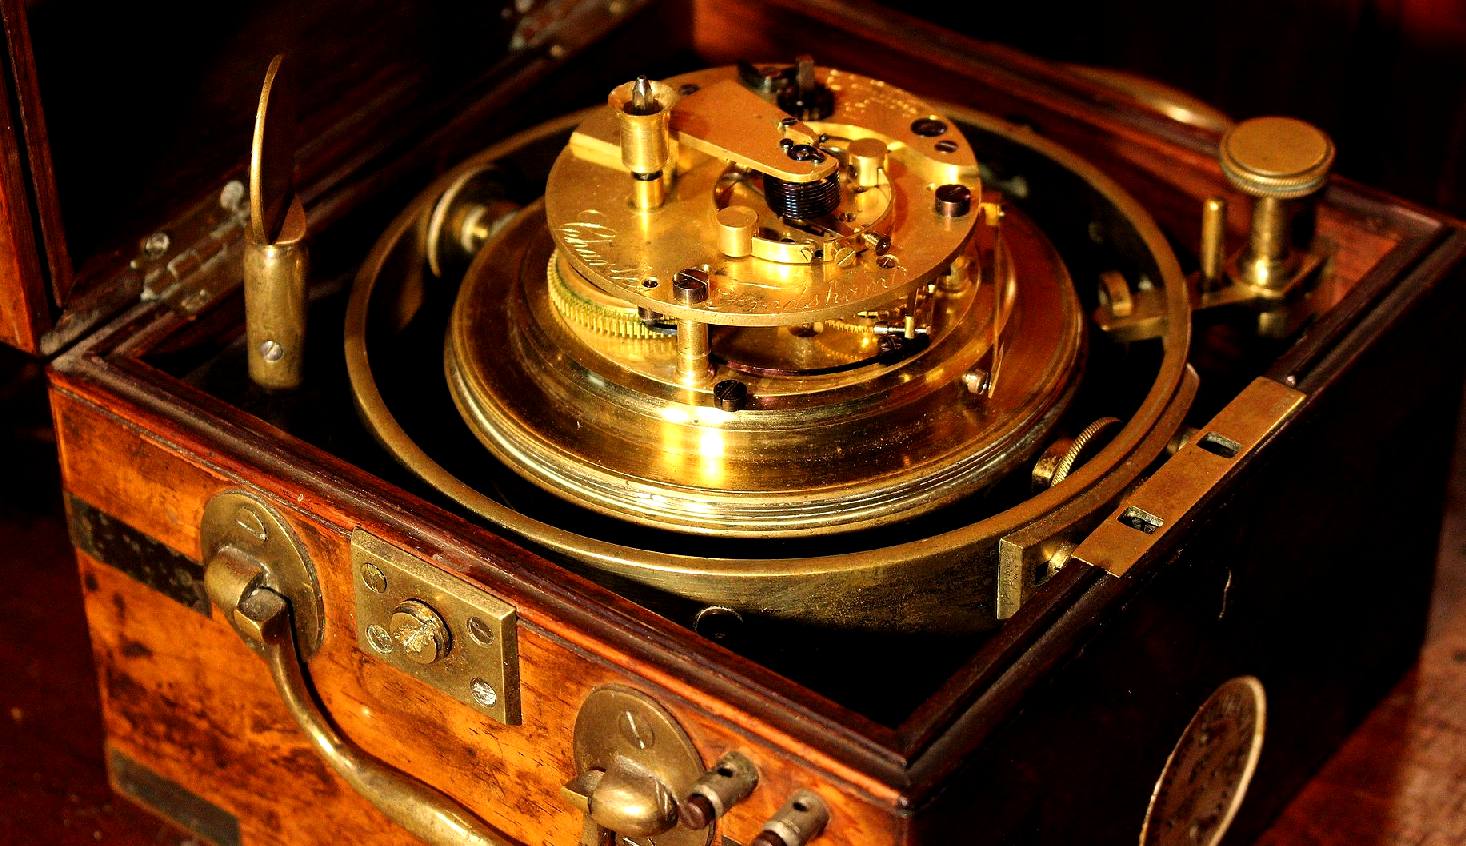 A brass marine chronometer in a beautiful wooden box